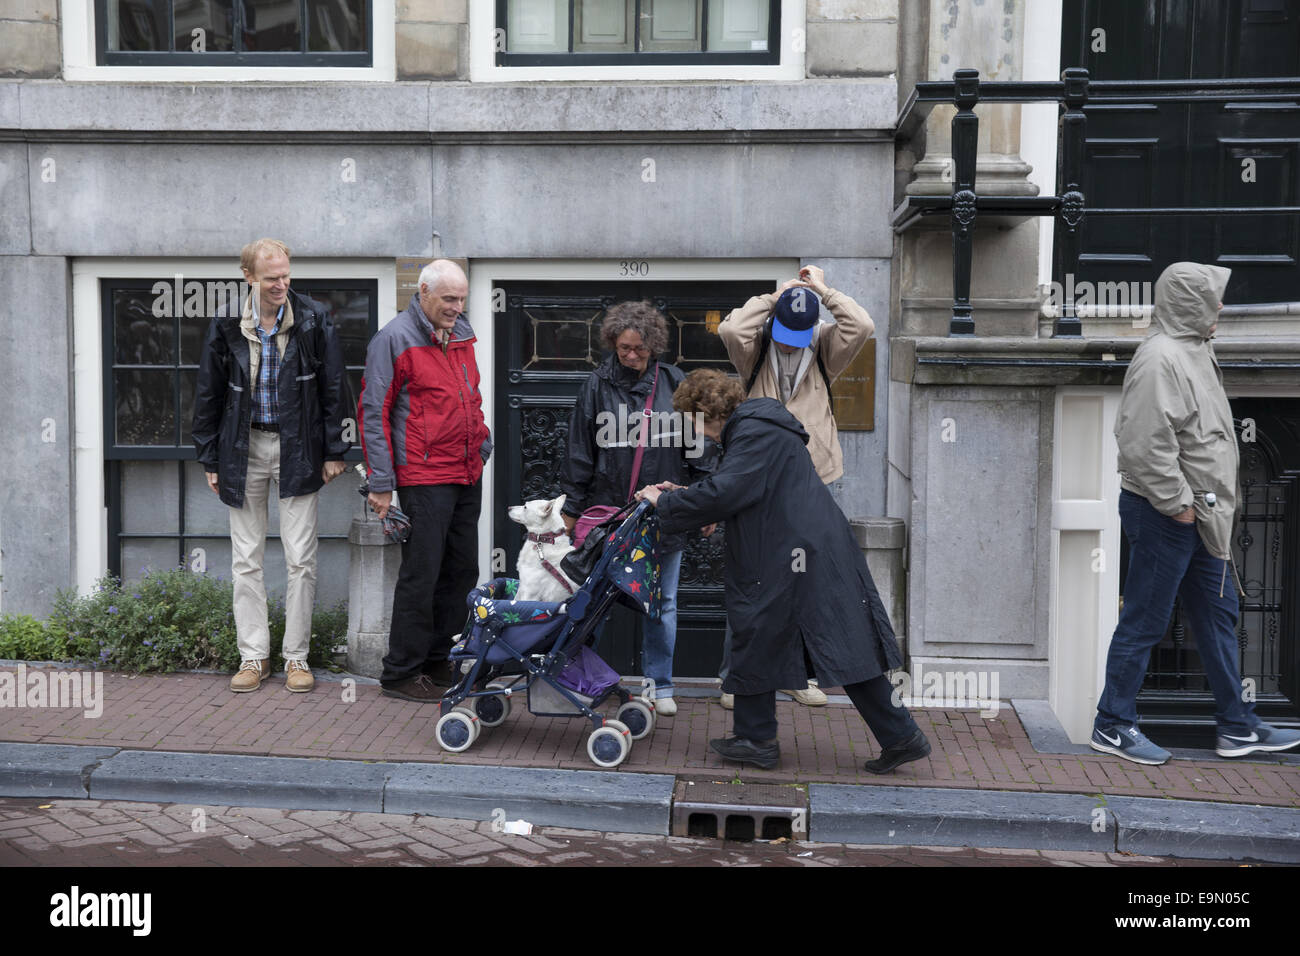 Woman pushes her dog in a stroller along a street in Central Amsterdam, Netherlands. Stock Photo